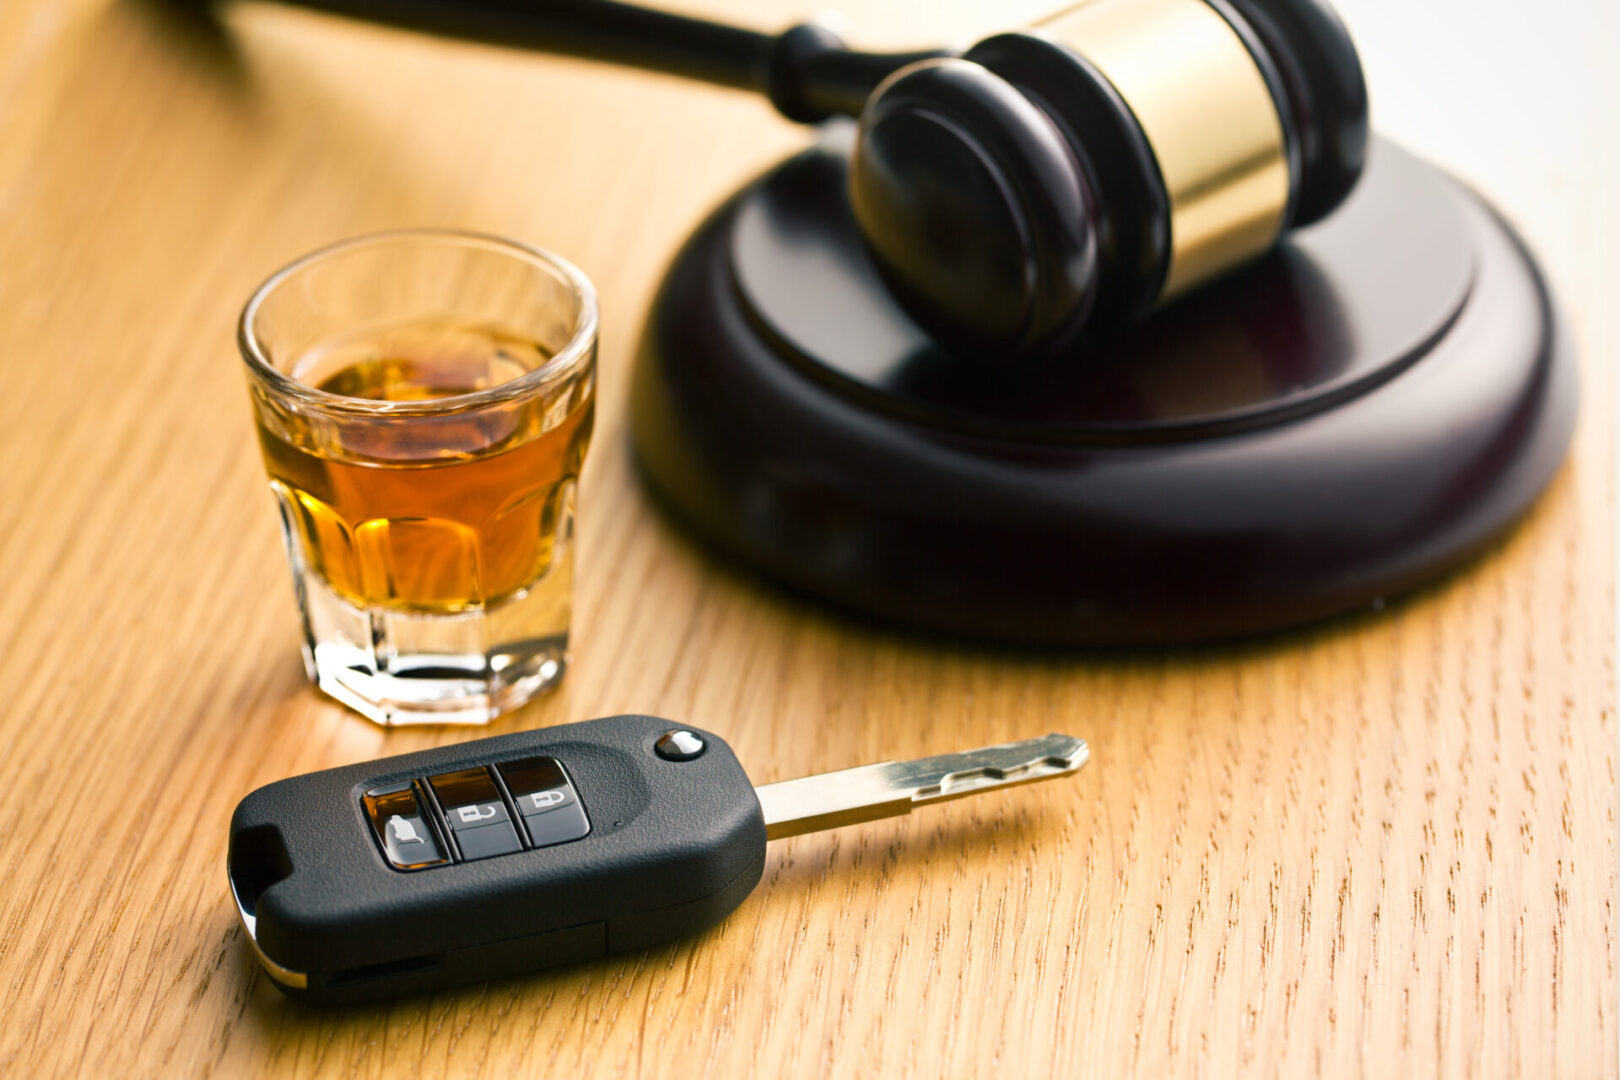 DUI - Driving Under the Influence